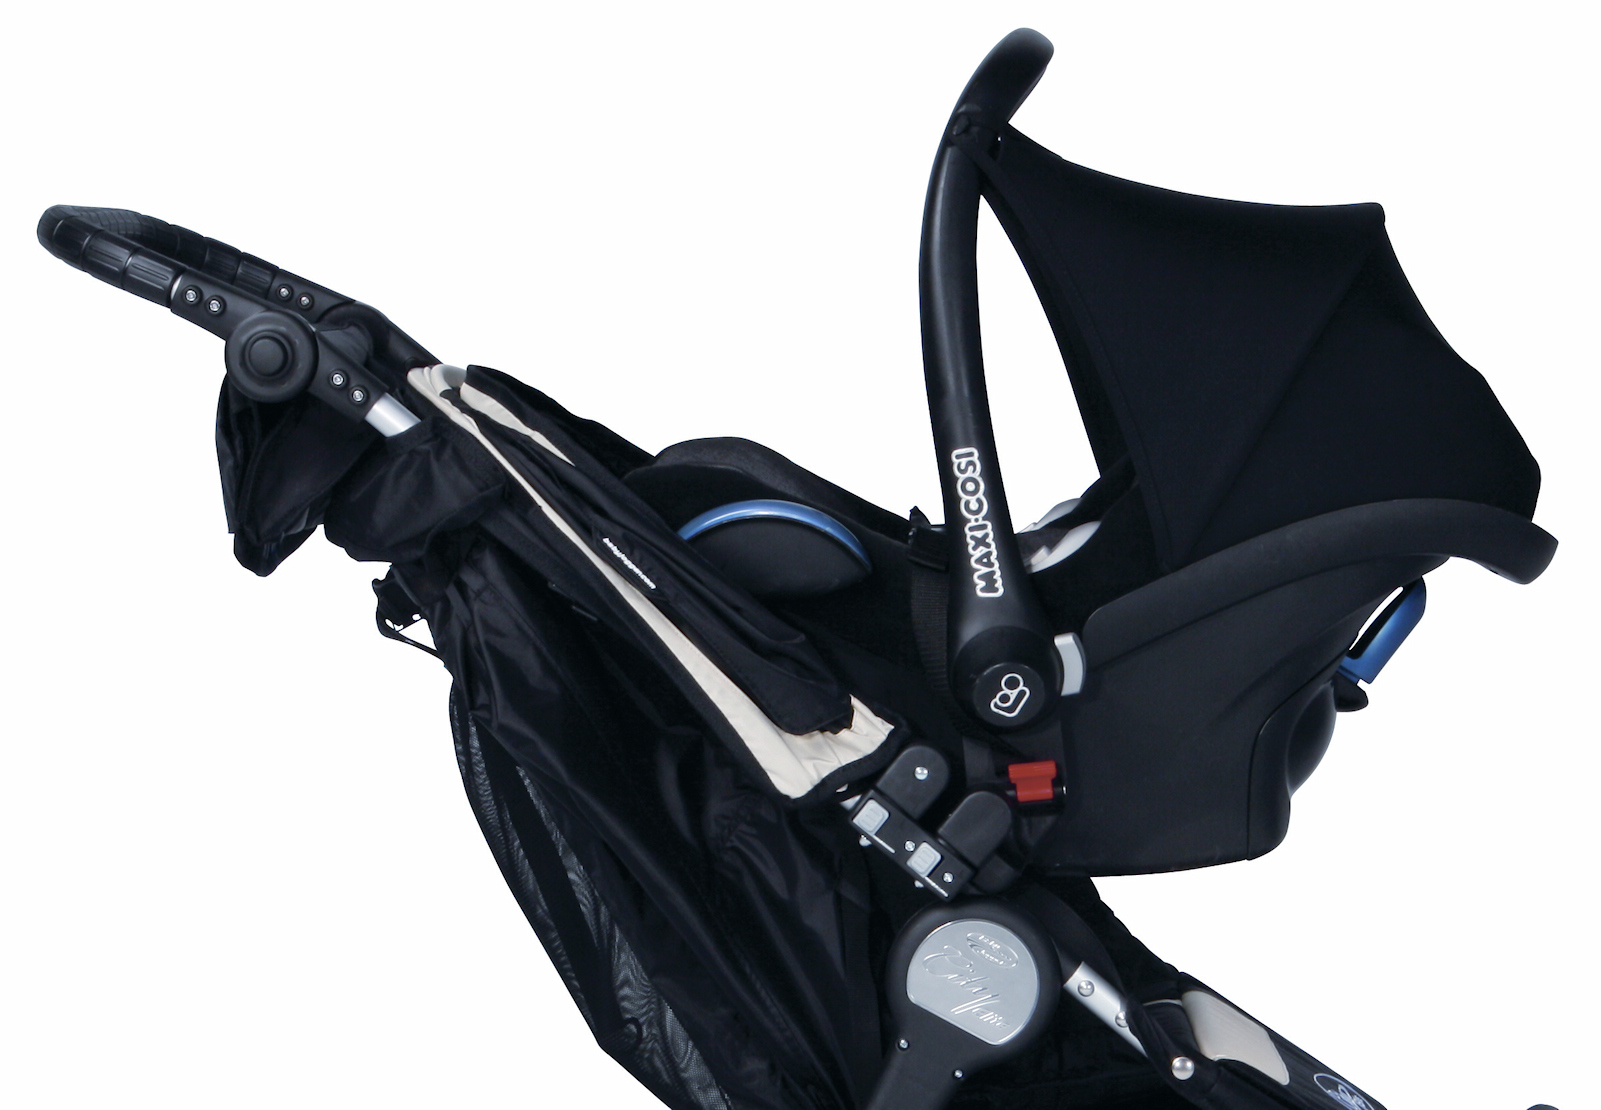 baby jogger double car seat adapter